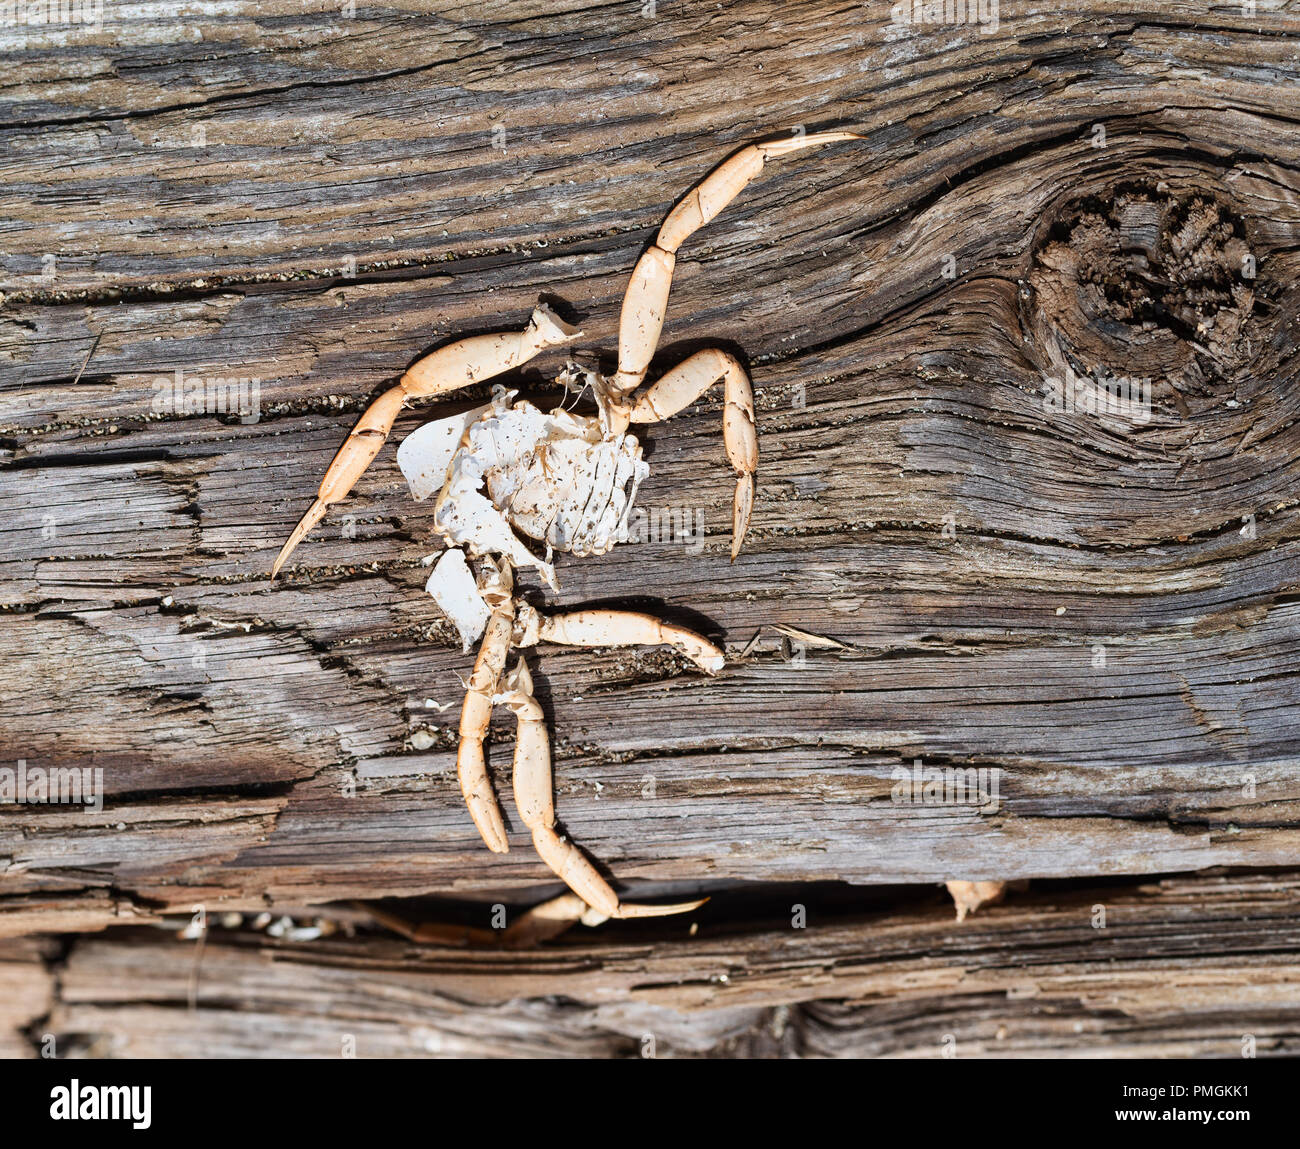 Top view of a broken and eaten crab shell on an old weathered driftwood board with a large knot. Stock Photo